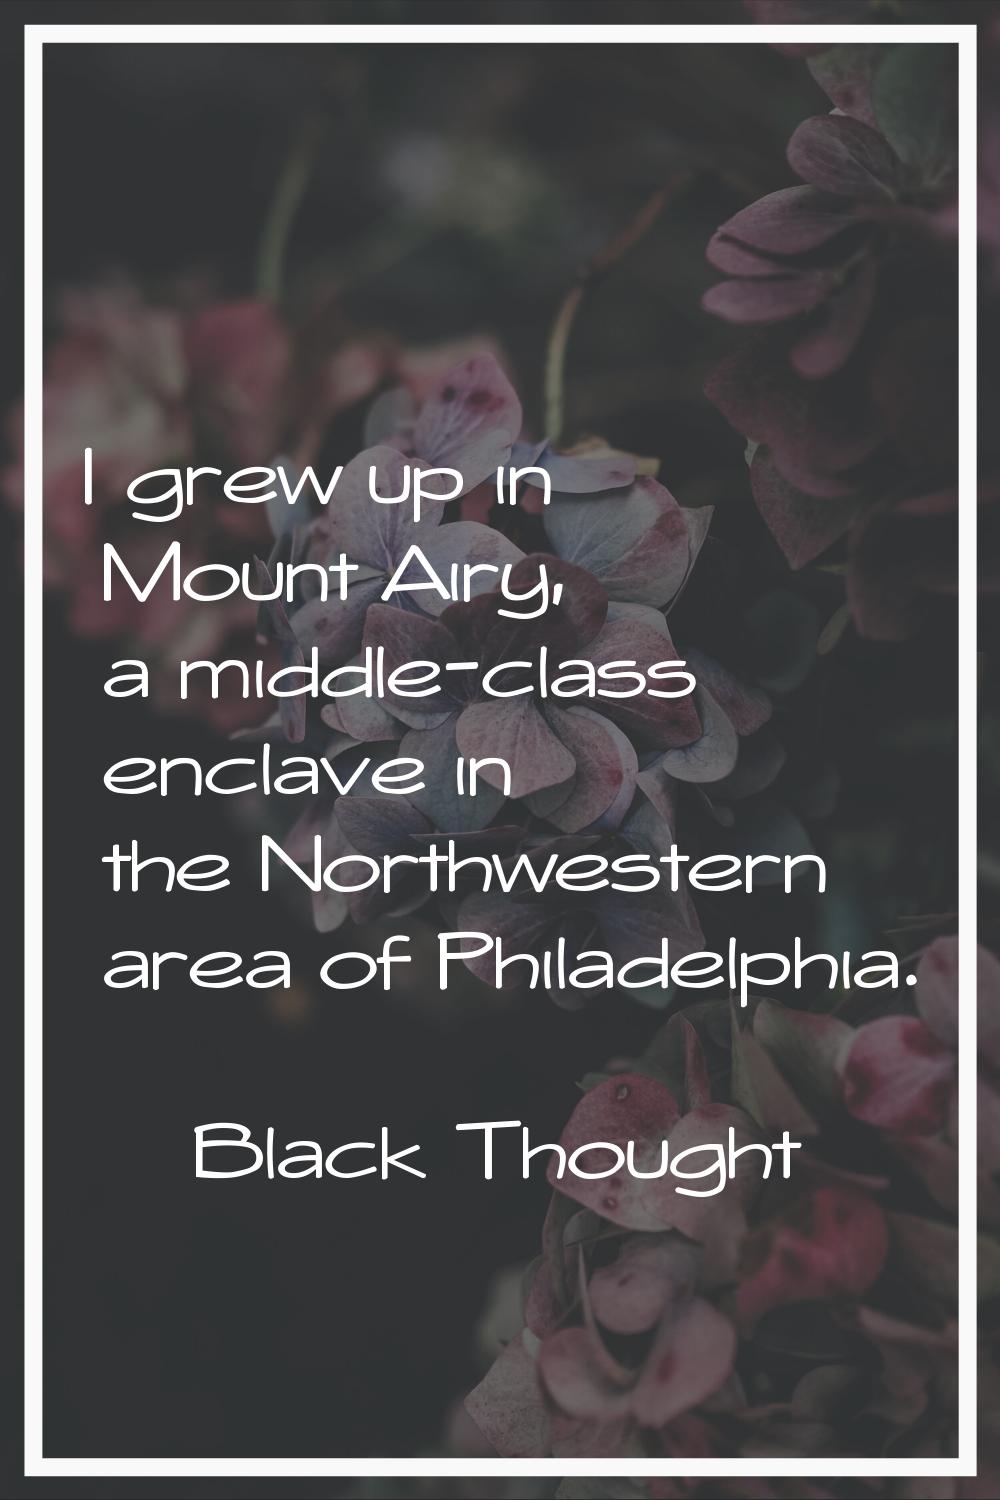 I grew up in Mount Airy, a middle-class enclave in the Northwestern area of Philadelphia.